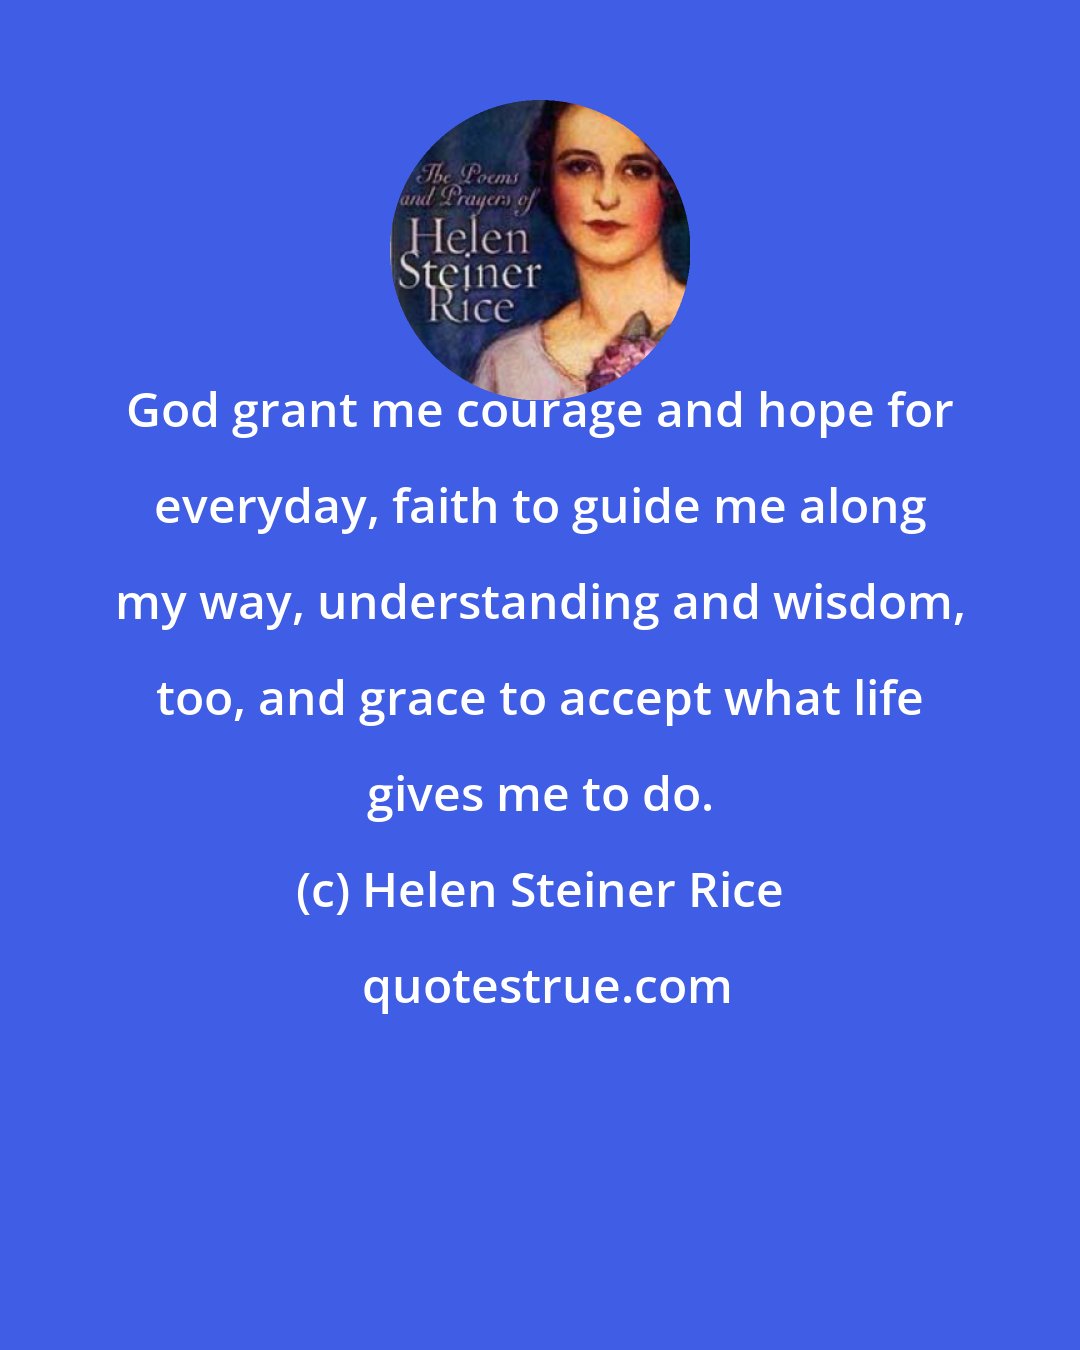 Helen Steiner Rice: God grant me courage and hope for everyday, faith to guide me along my way, understanding and wisdom, too, and grace to accept what life gives me to do.